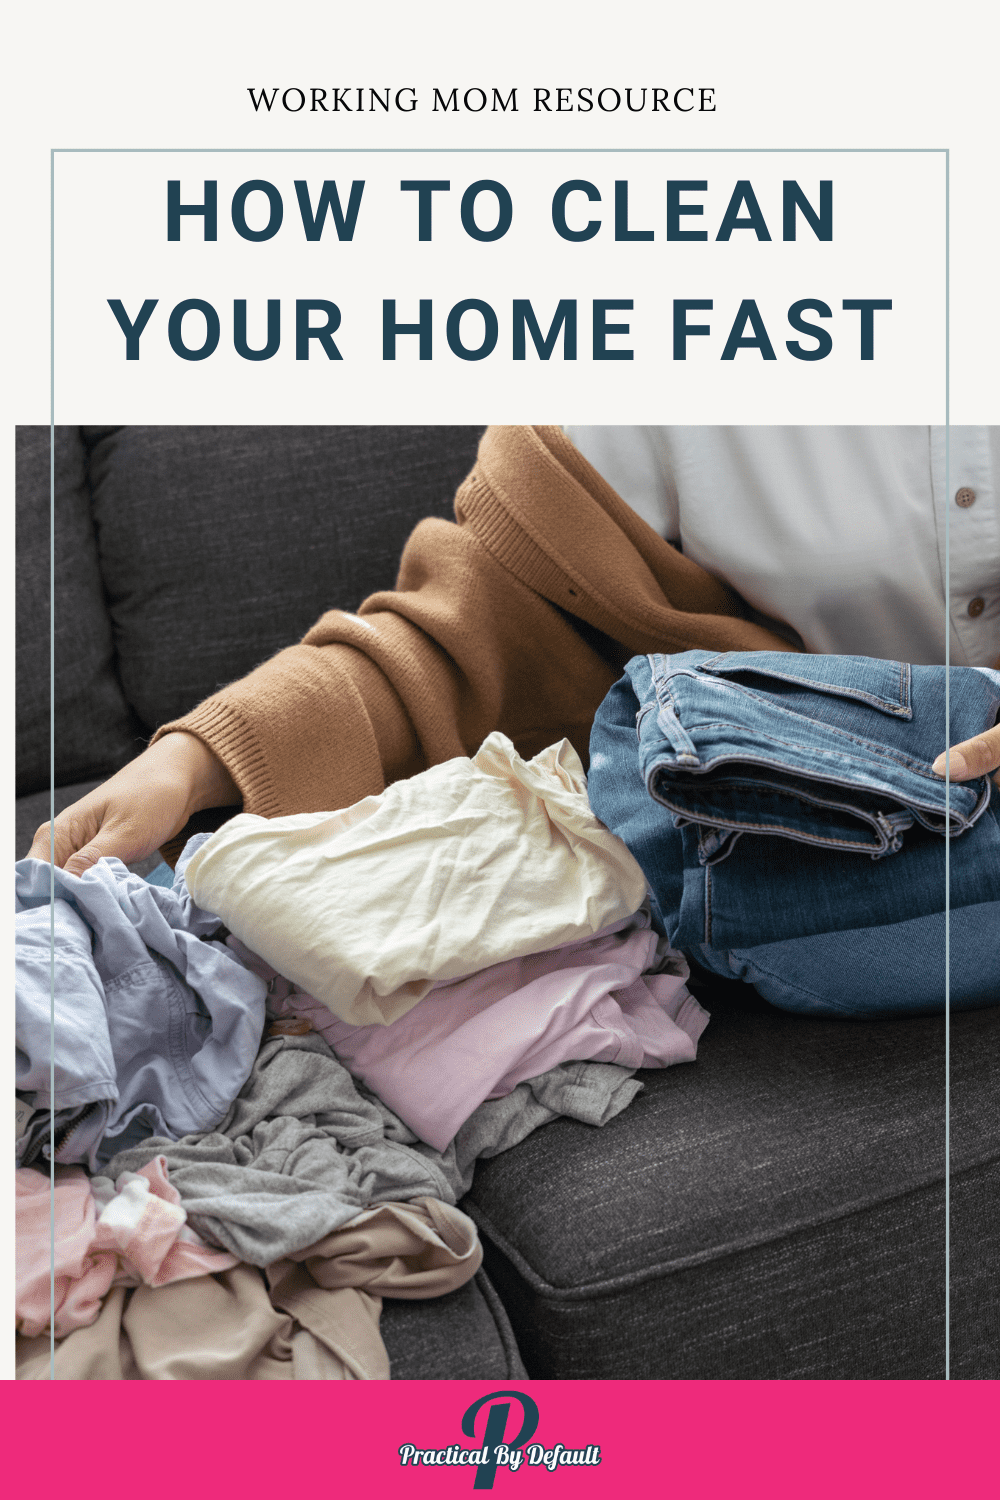 How To Clean Your Home Fast